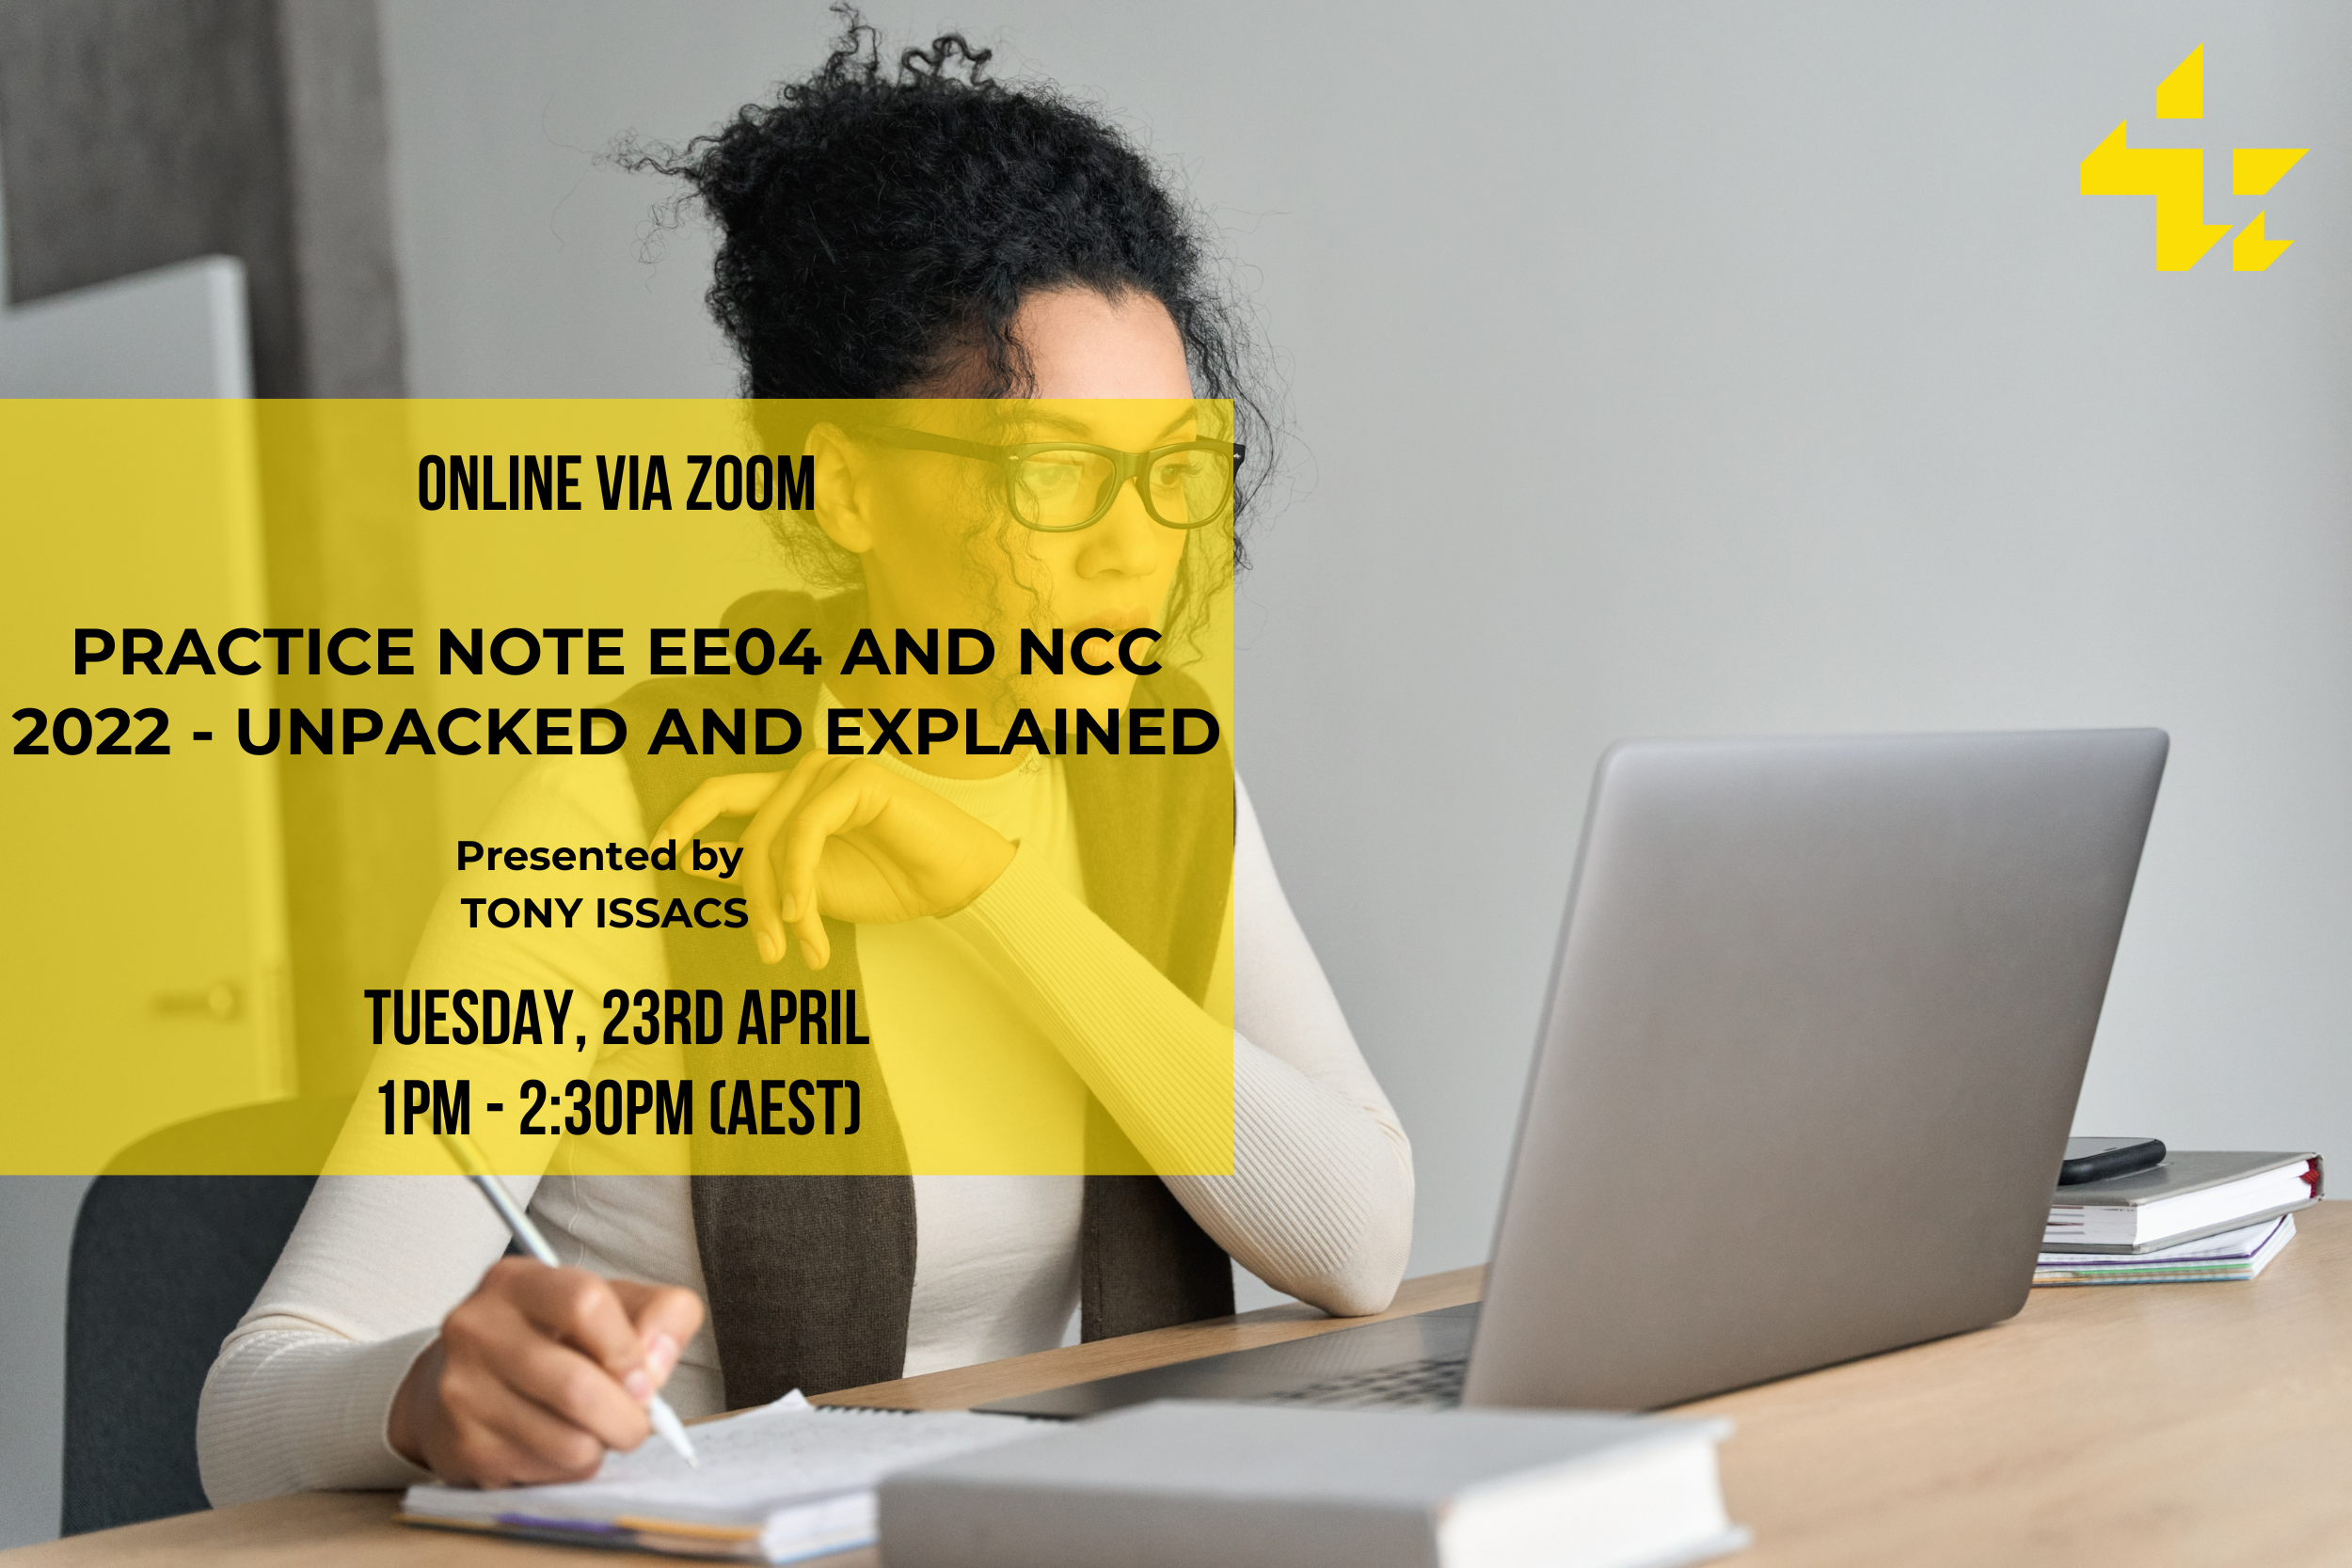 Practice Note EE04 and NCC 2022 - Unpacked and Explained